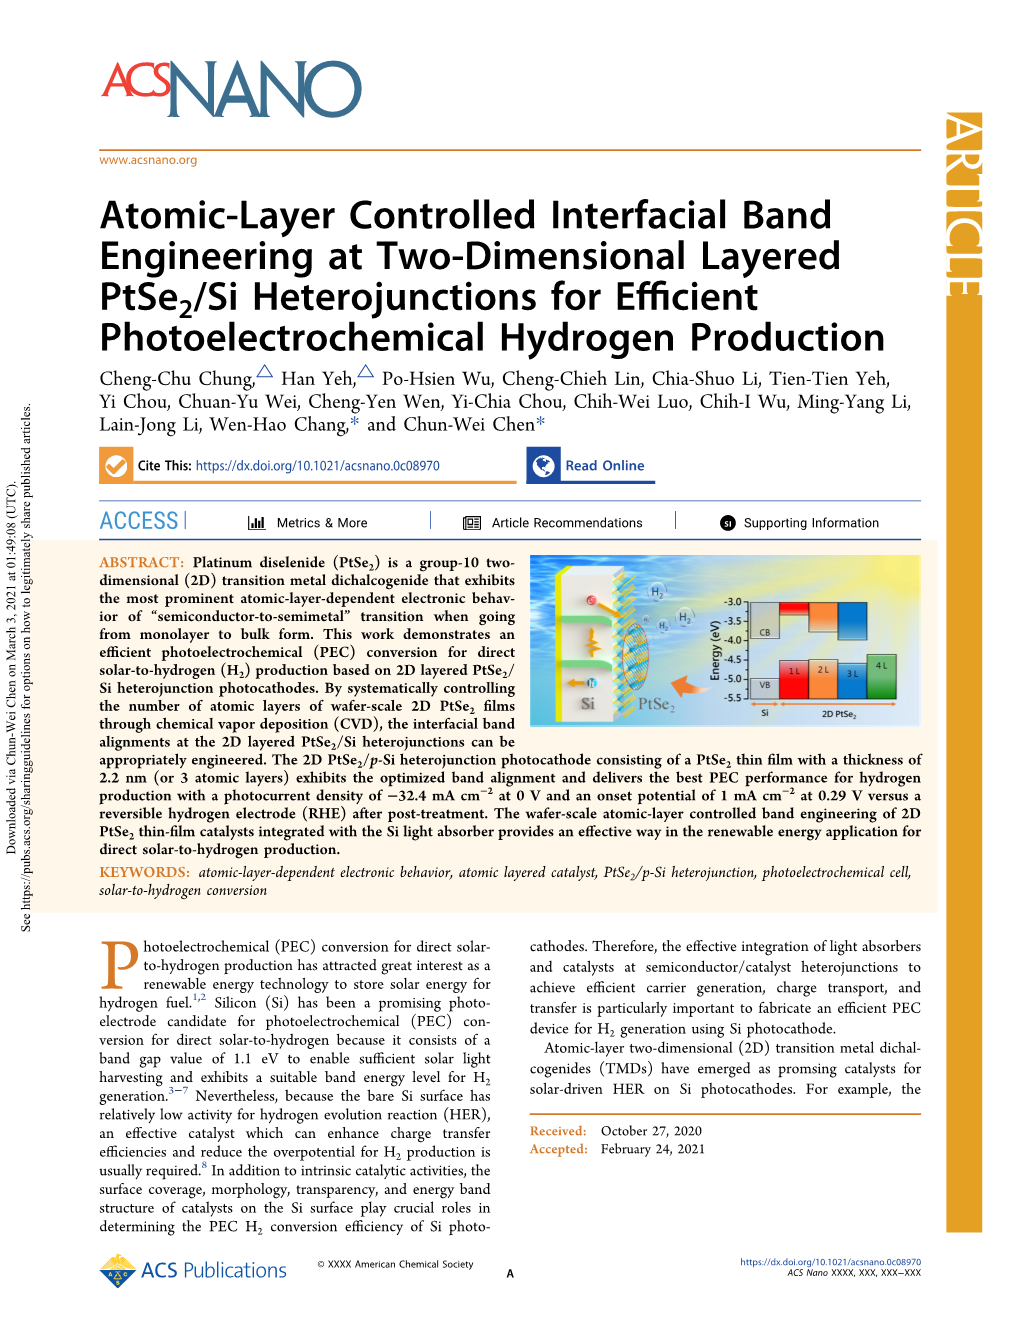 Atomic-Layer Controlled Interfacial Band Engineering at Two